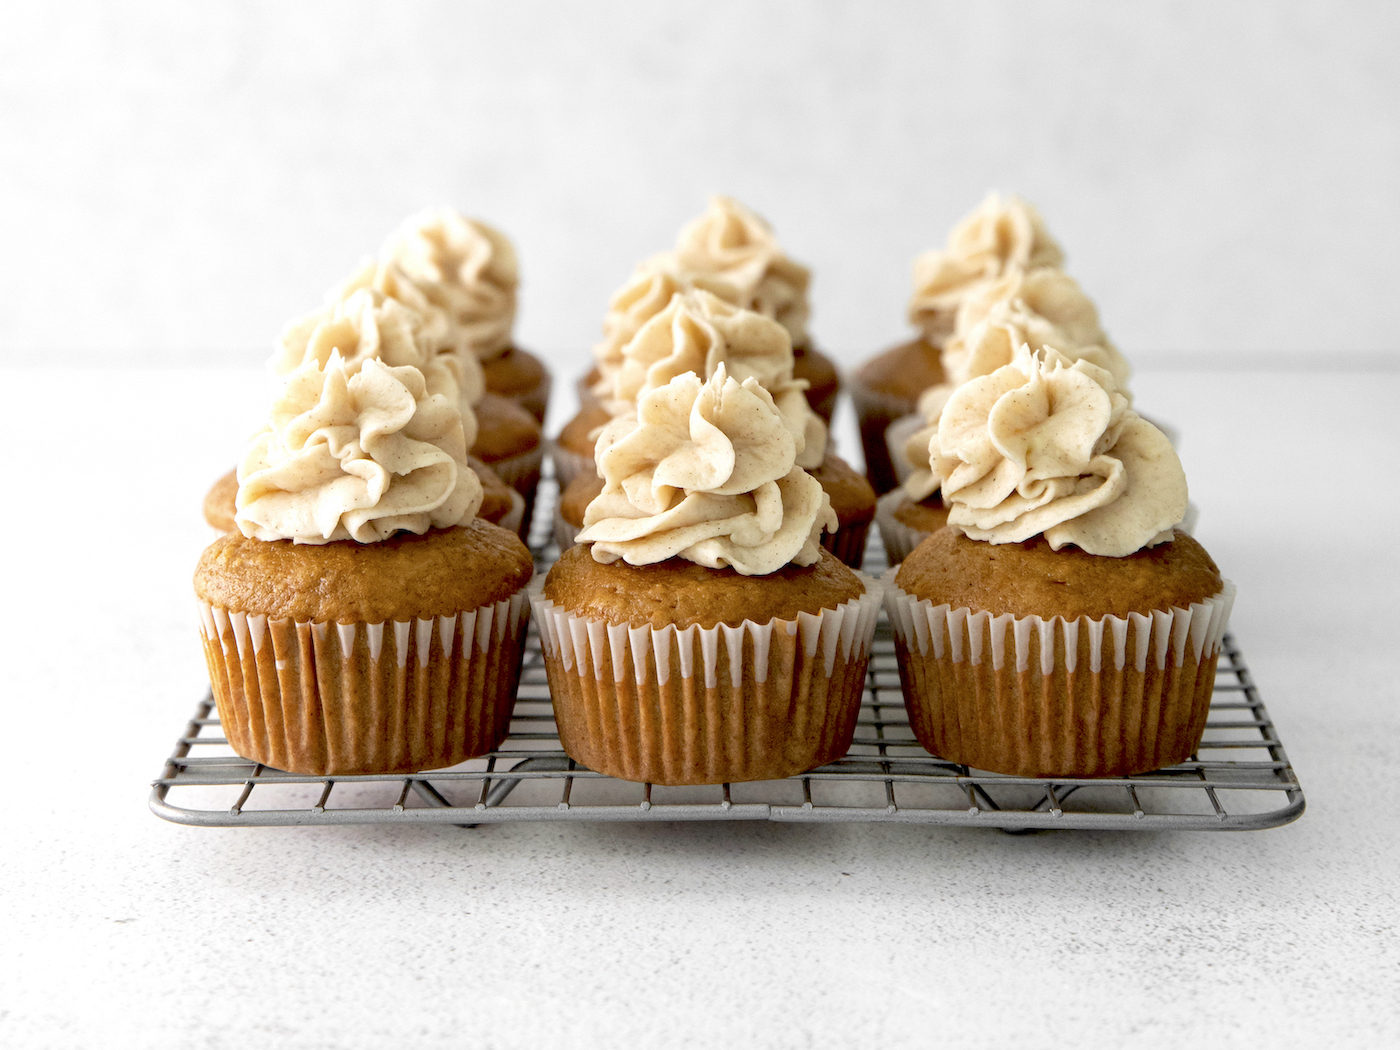 Gingerbread Cupcakes with Spiced White Chocolate Buttercream